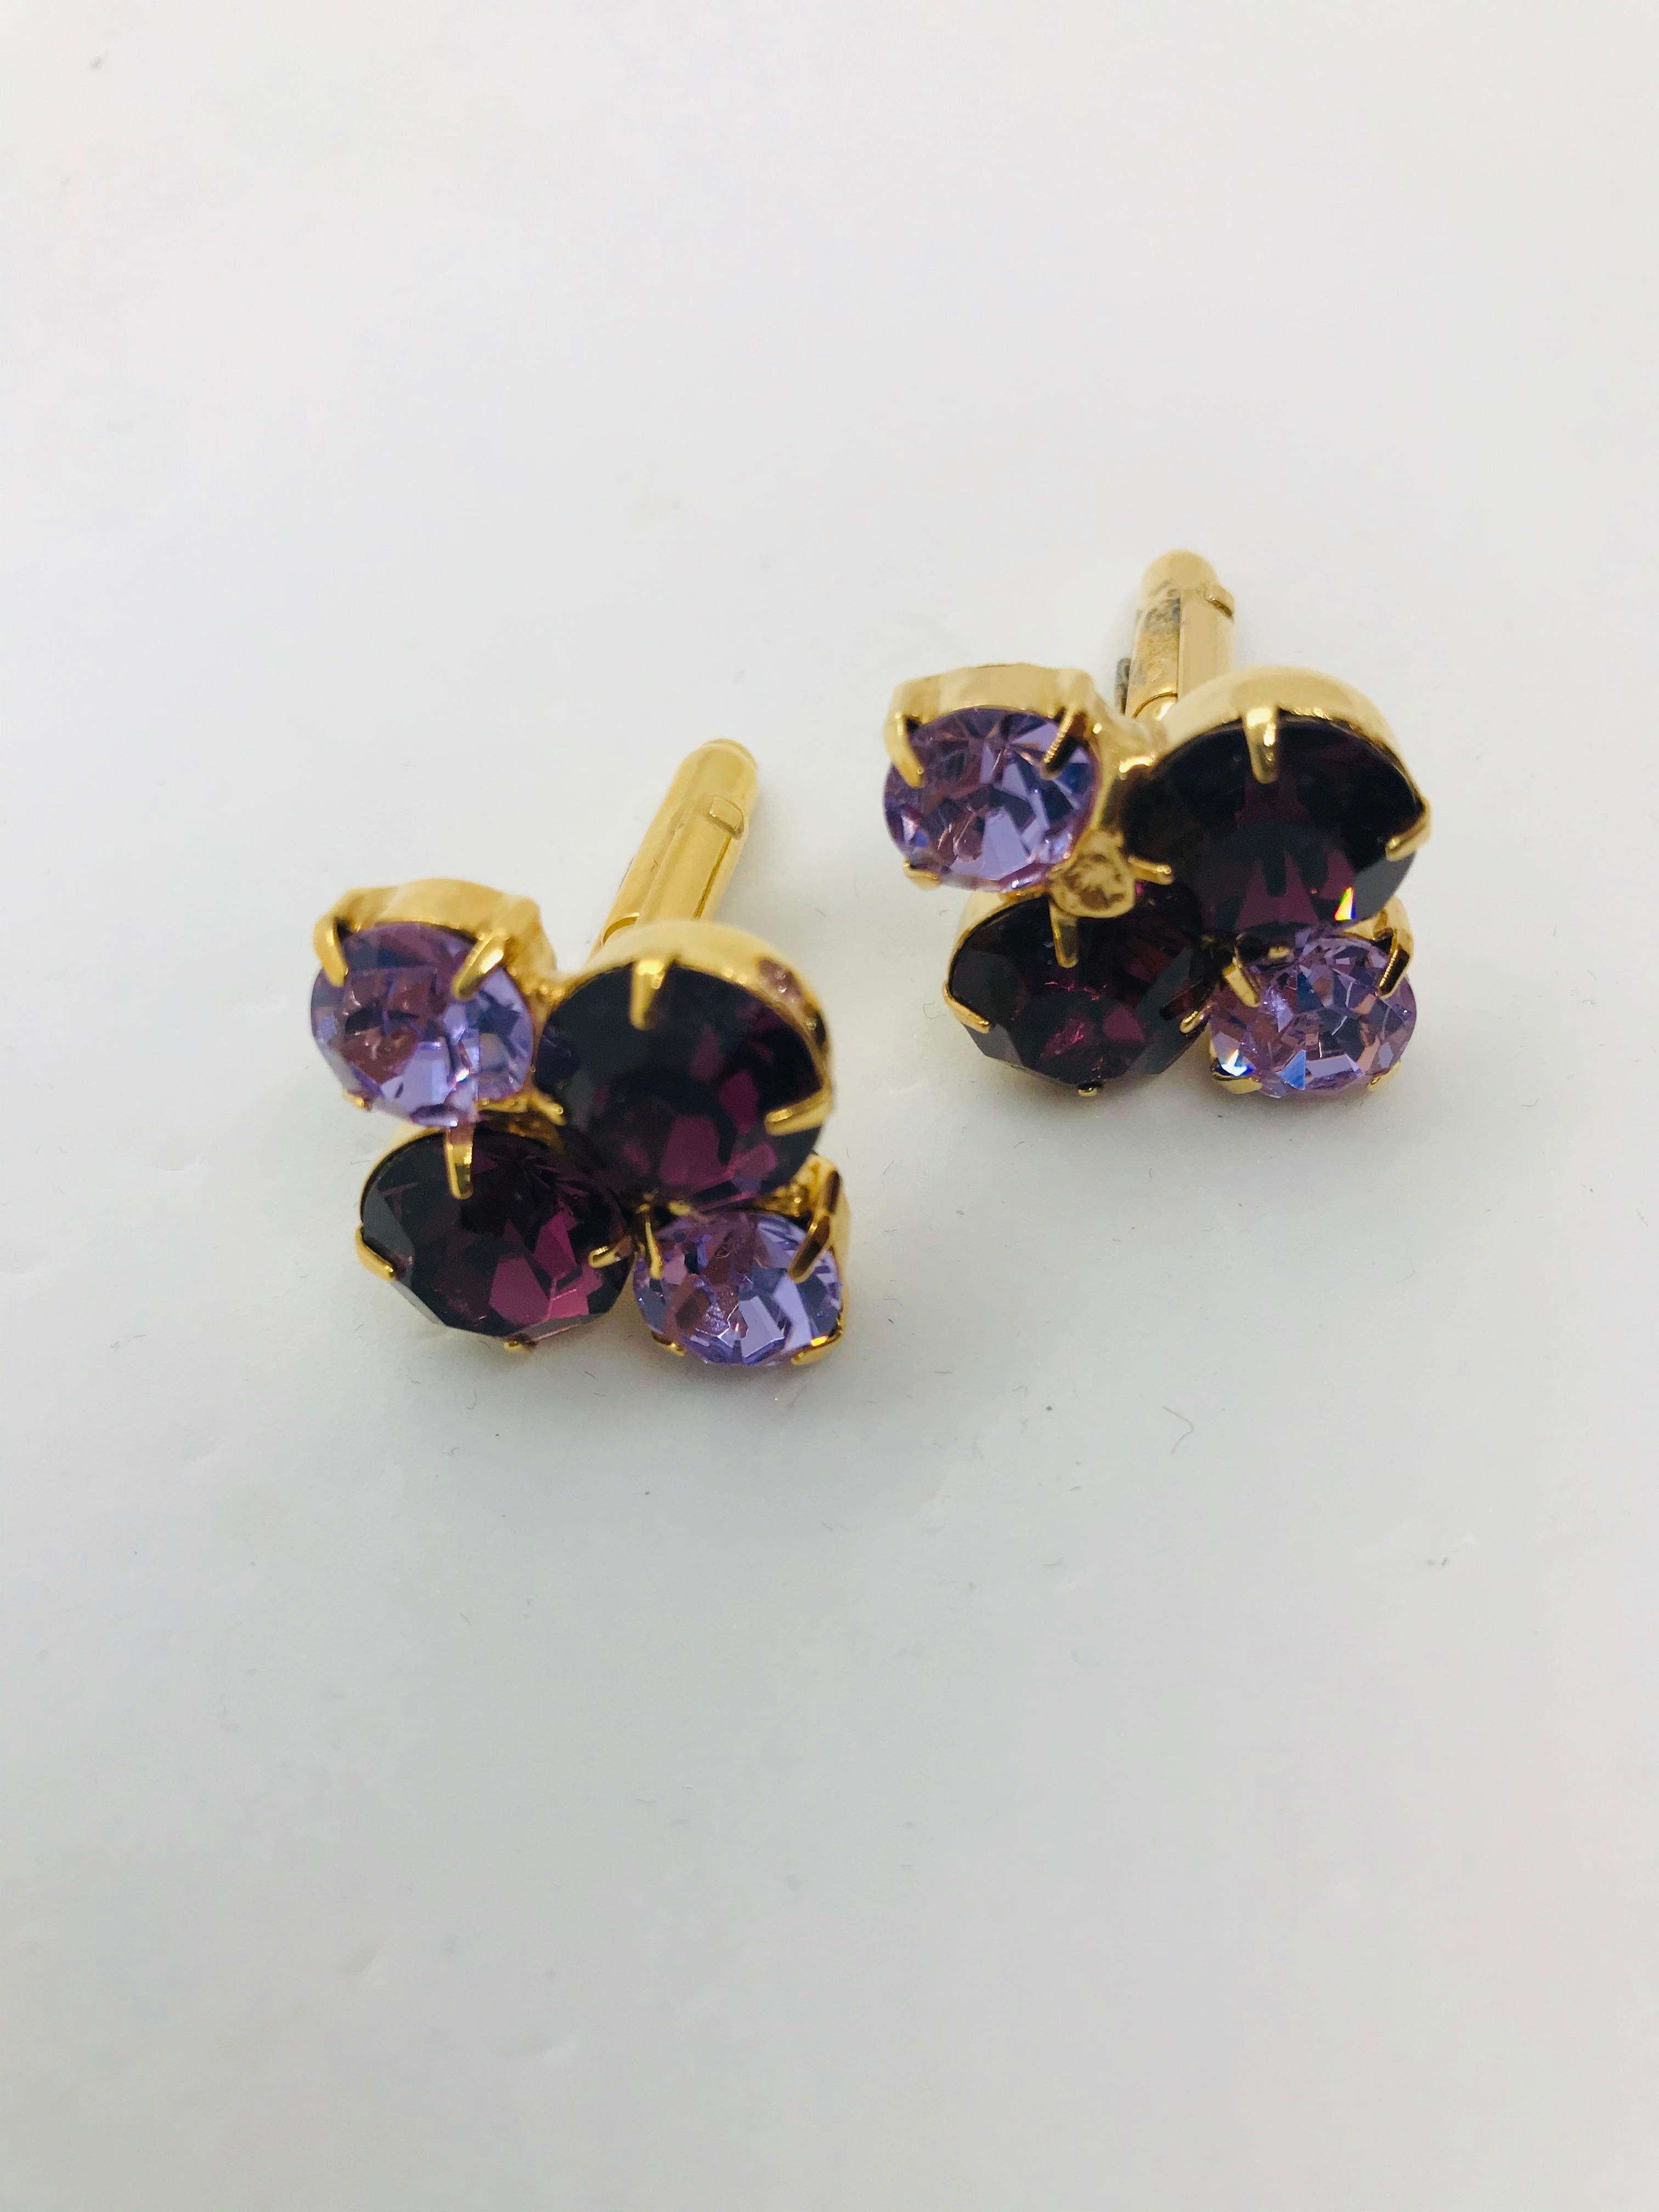 Every dress shirt needs a great pair of cuff links!  These lilac and amethyst crystal cuff links add a subtle pop of colour to any business or formal wardrobe.  These cuff links feature 1960s vintage amethyst and lilac Austrian crystal round stones.